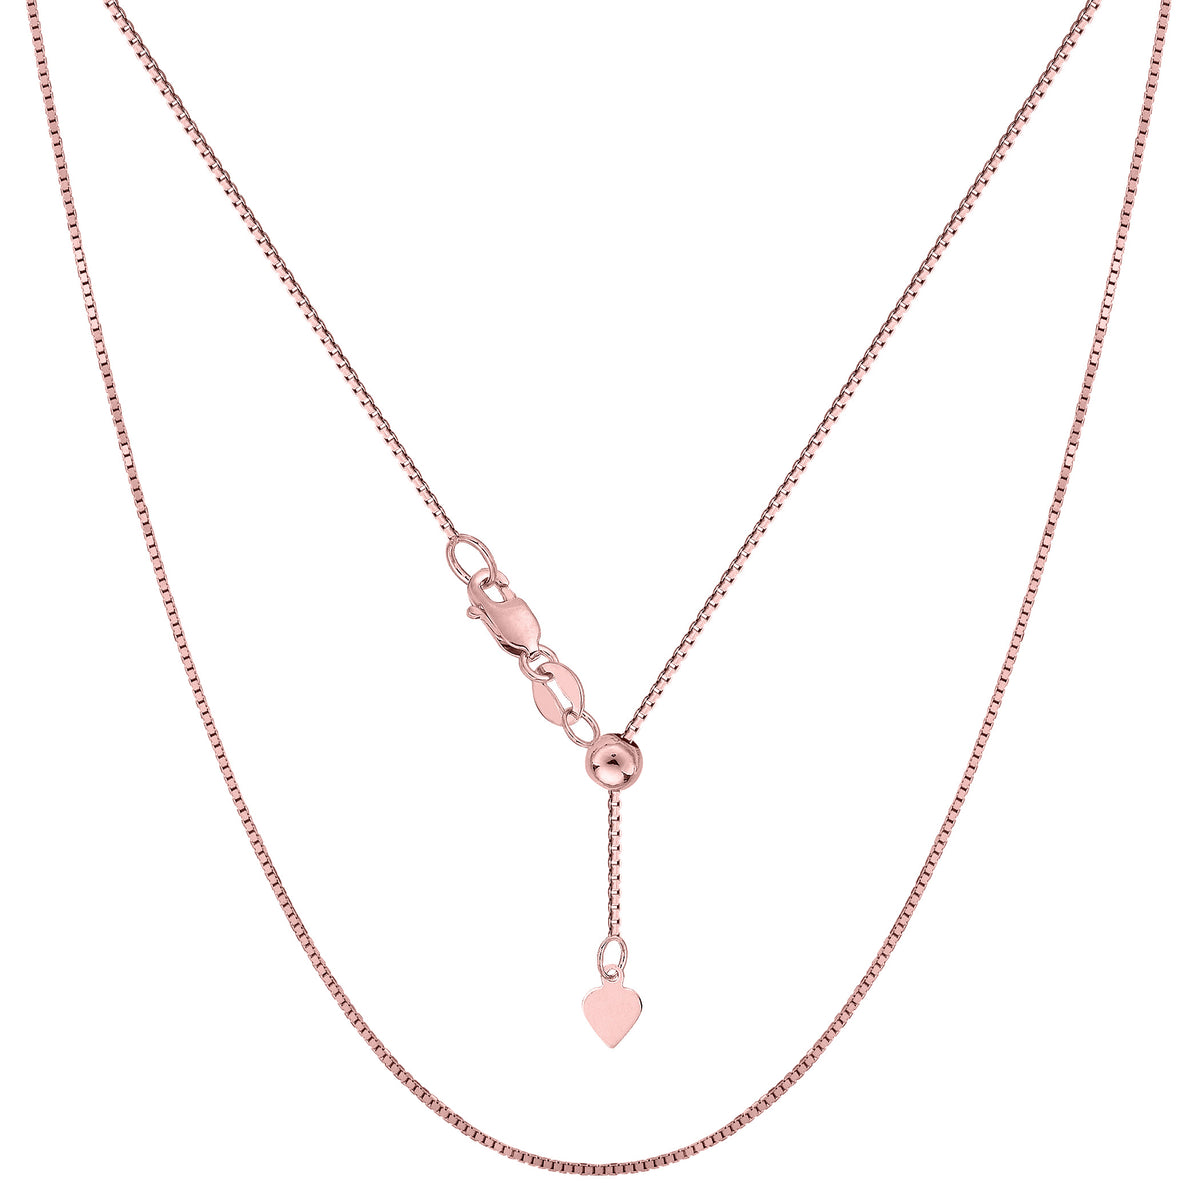 14k Rose Gold Adjustable Box Chain Necklace, 0.7mm, 22"